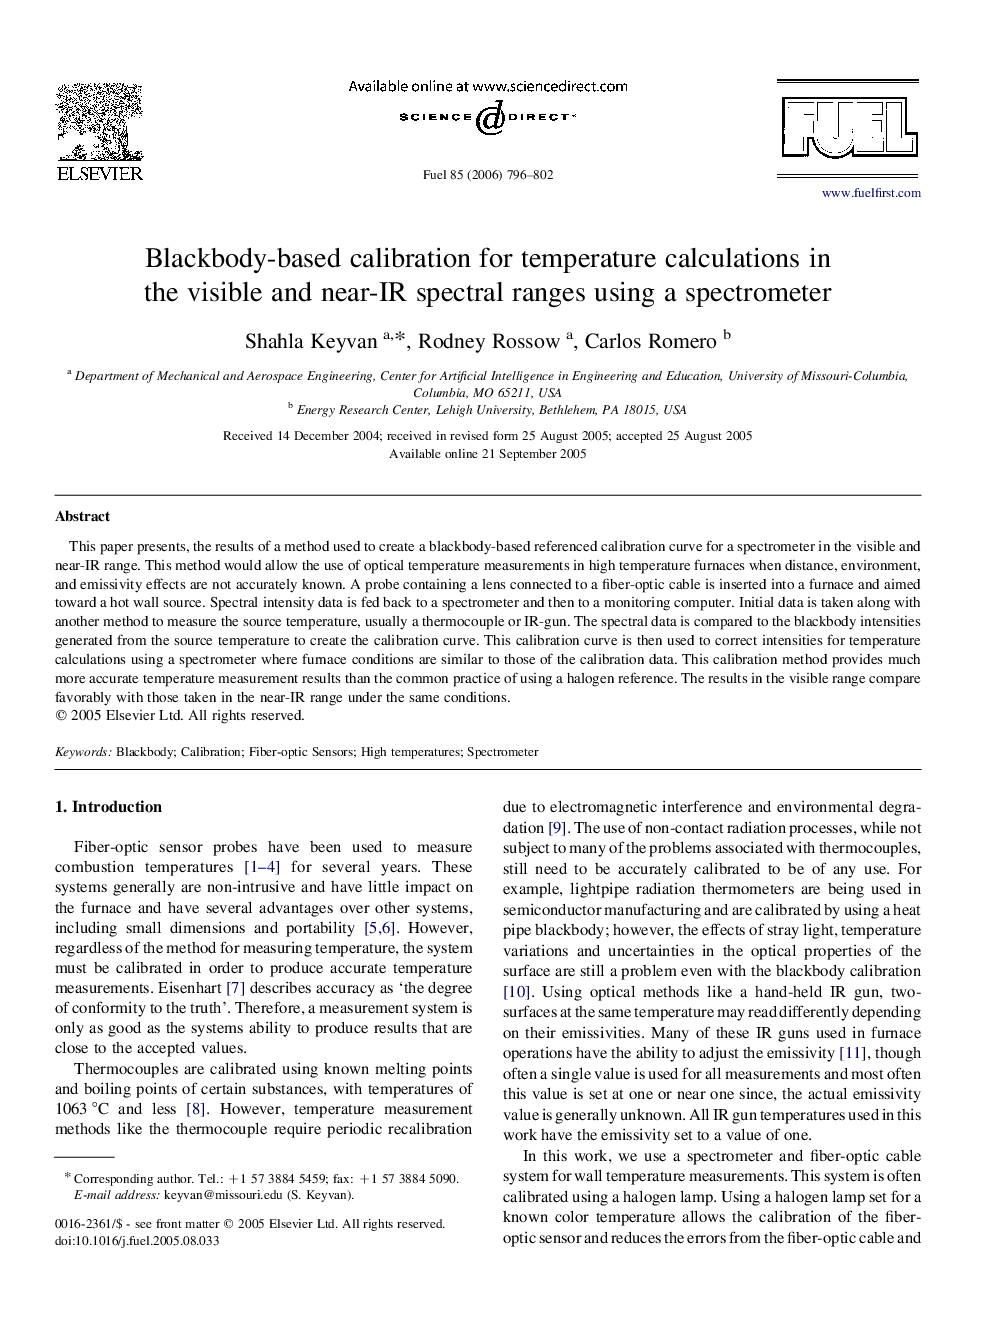 Blackbody-based calibration for temperature calculations in the visible and near-IR spectral ranges using a spectrometer